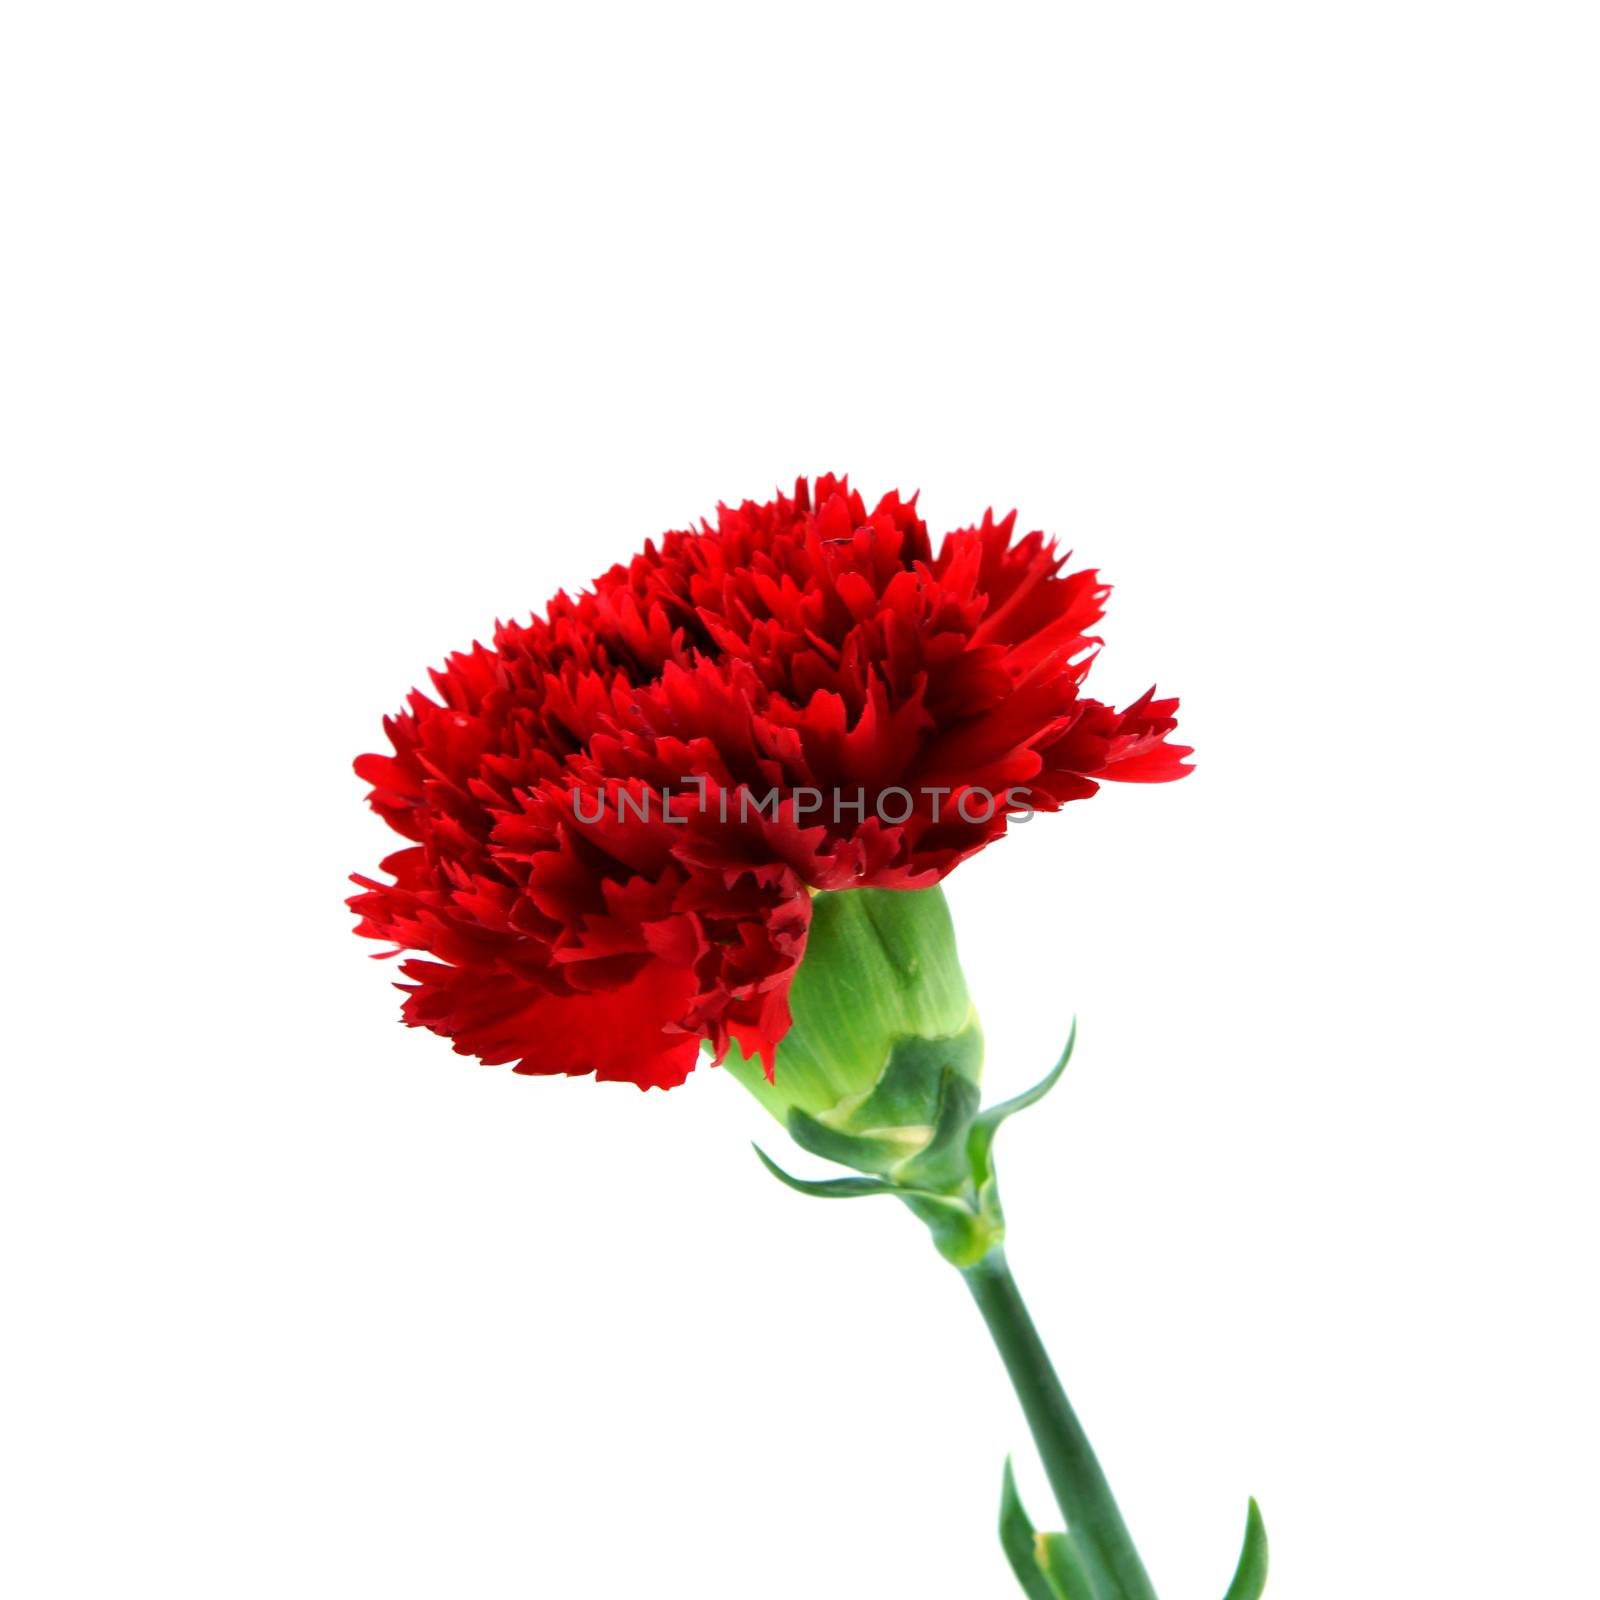 elegant carnation for mother's day image by Noppharat_th